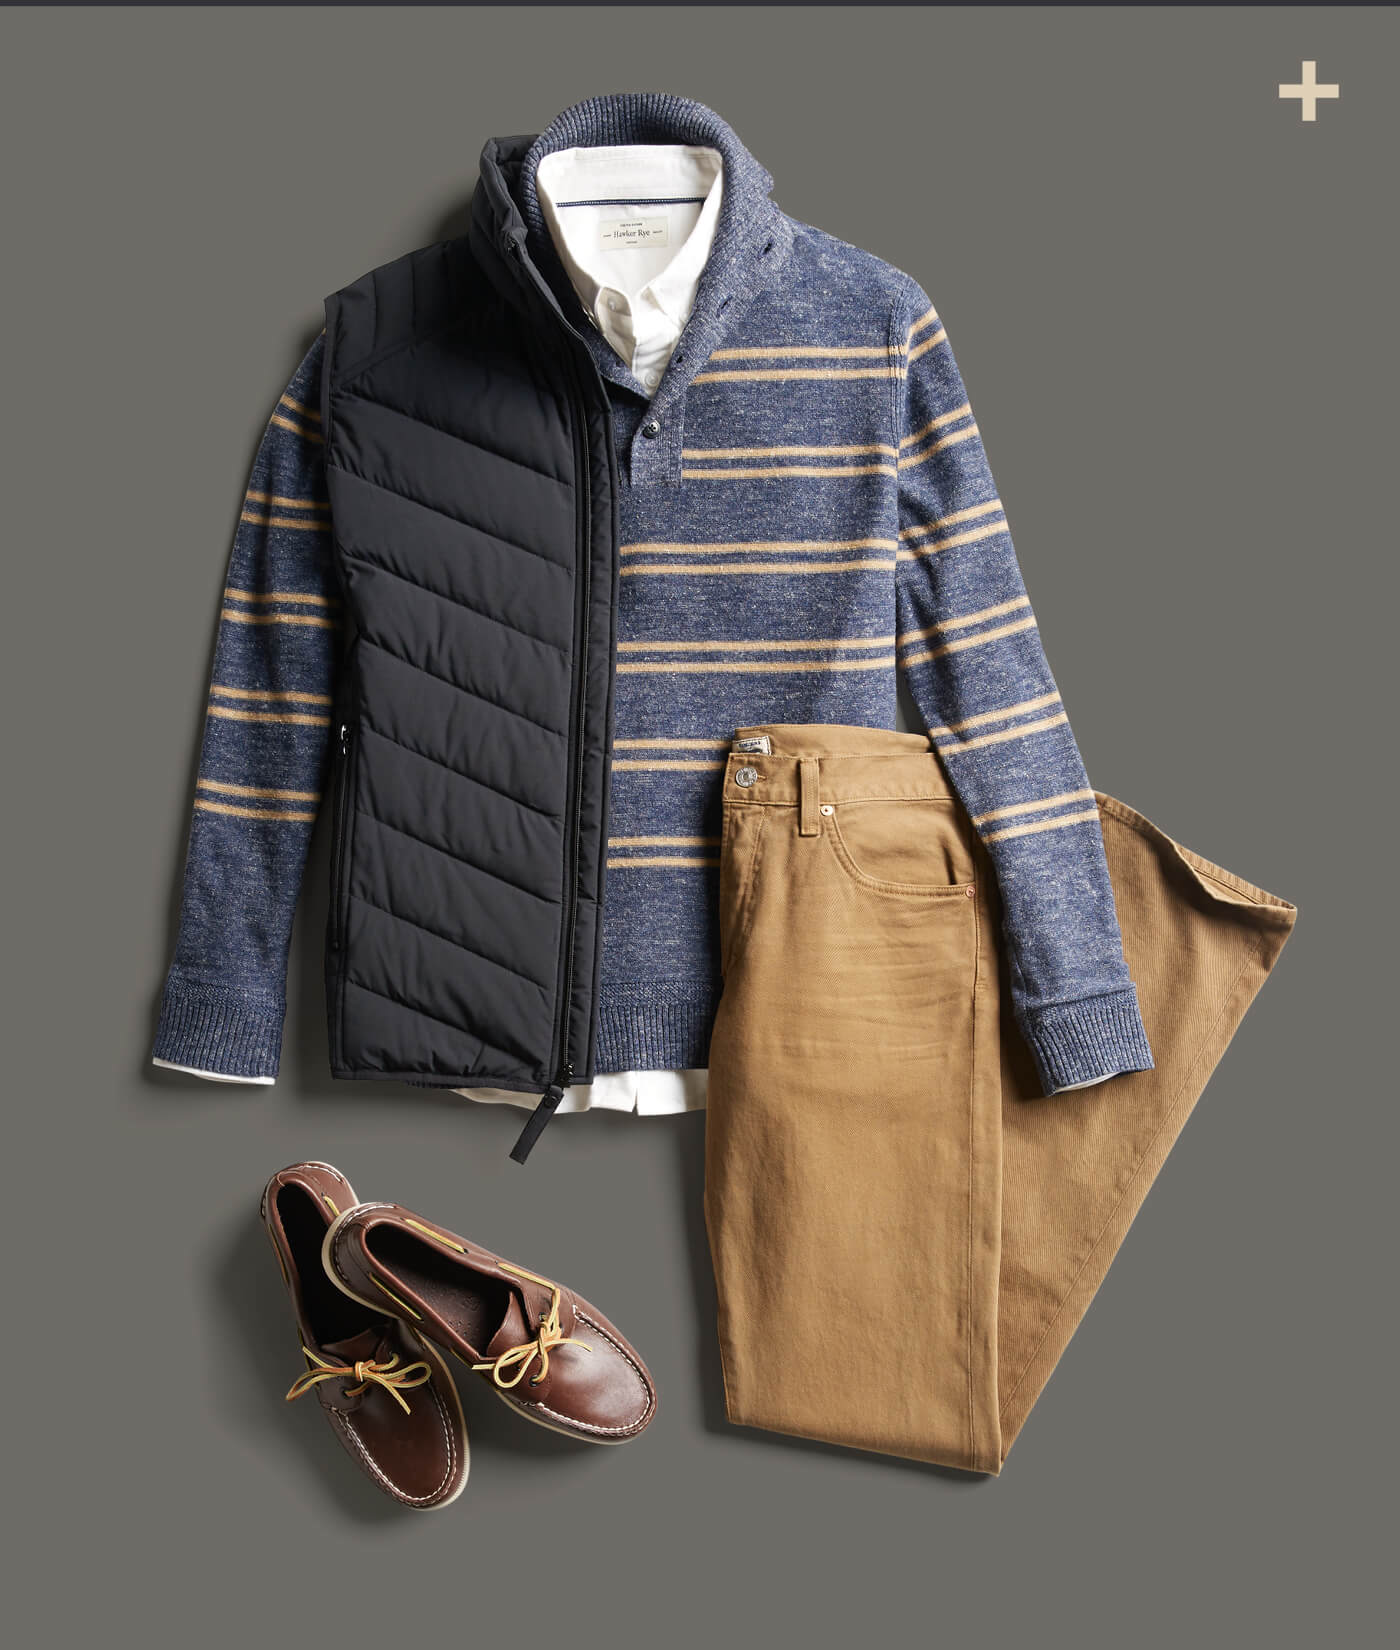 How to Craft the Perfect Weekend Look | Stitch Fix Men